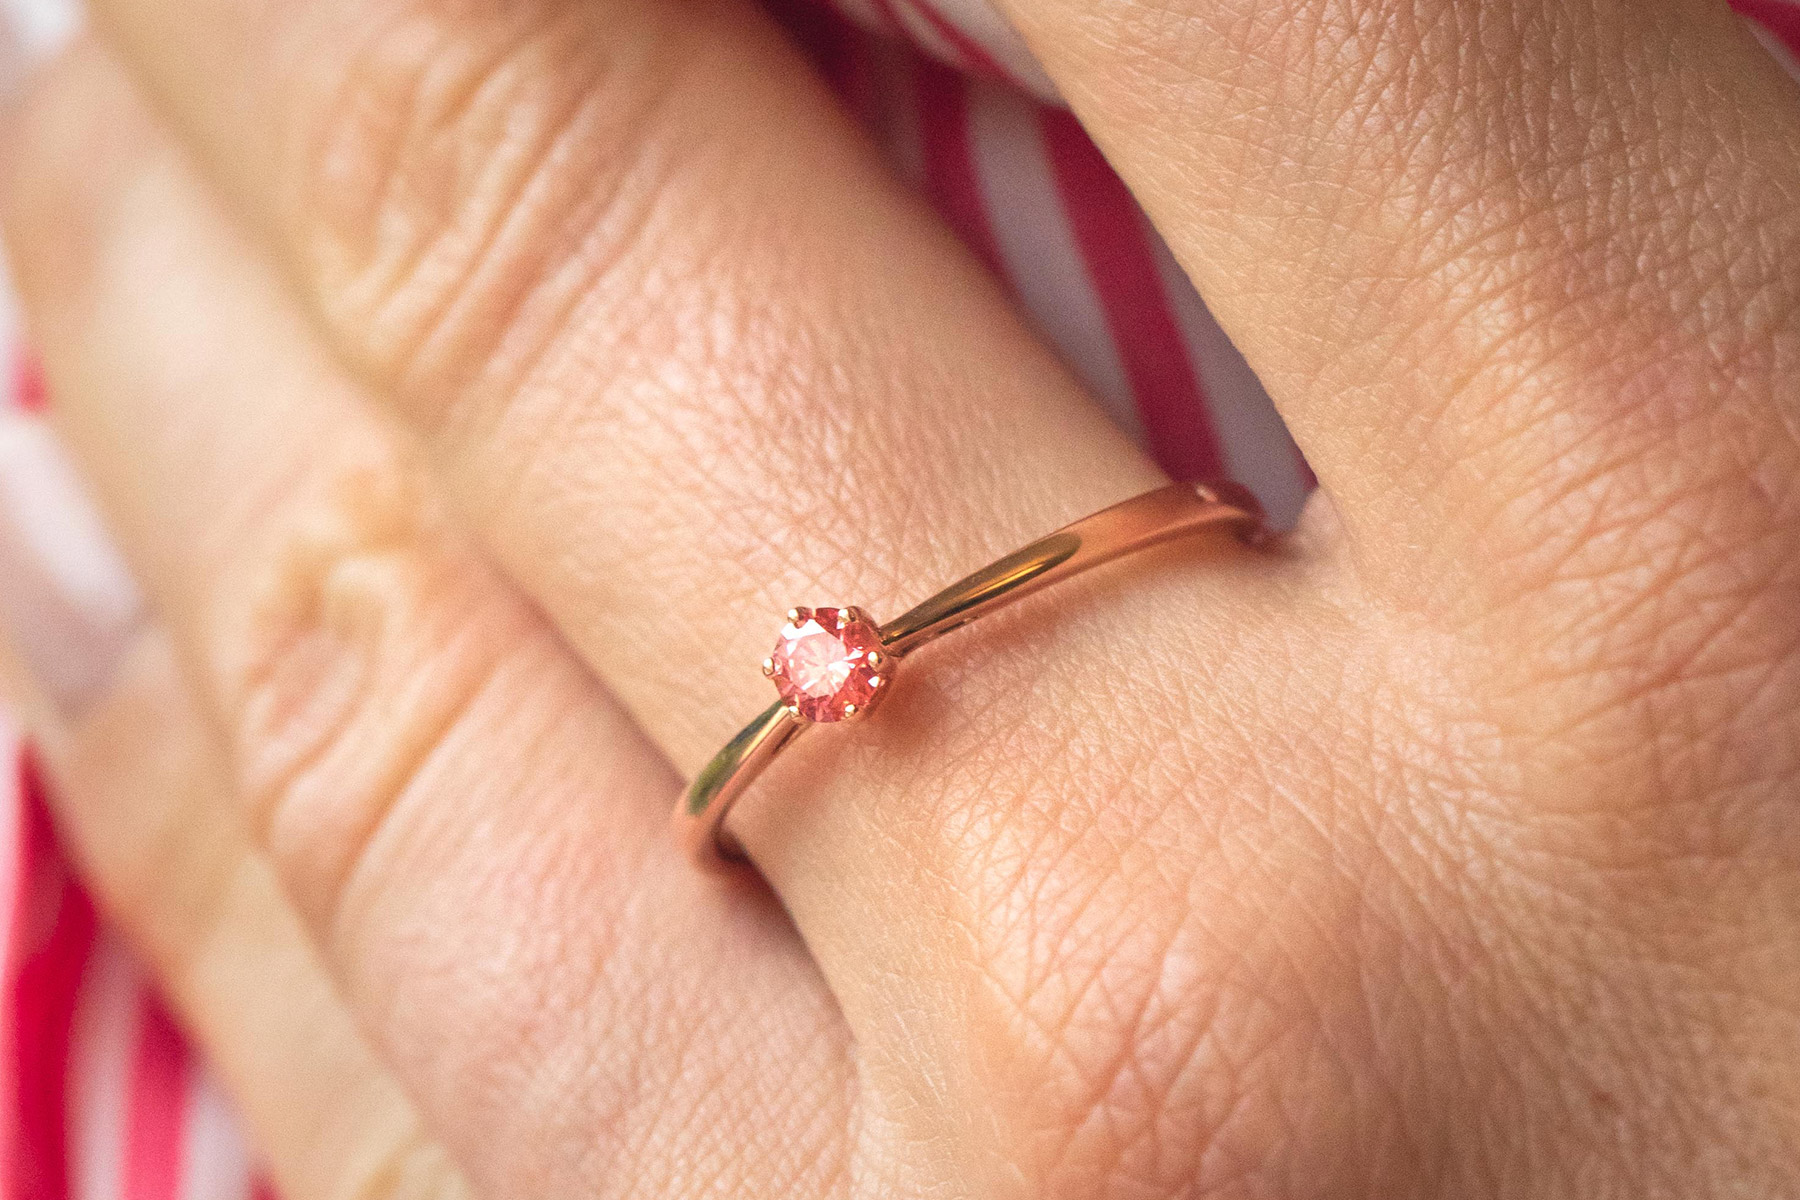 On the woman's ring finger is a gold ring with a lab-grown pink diamond